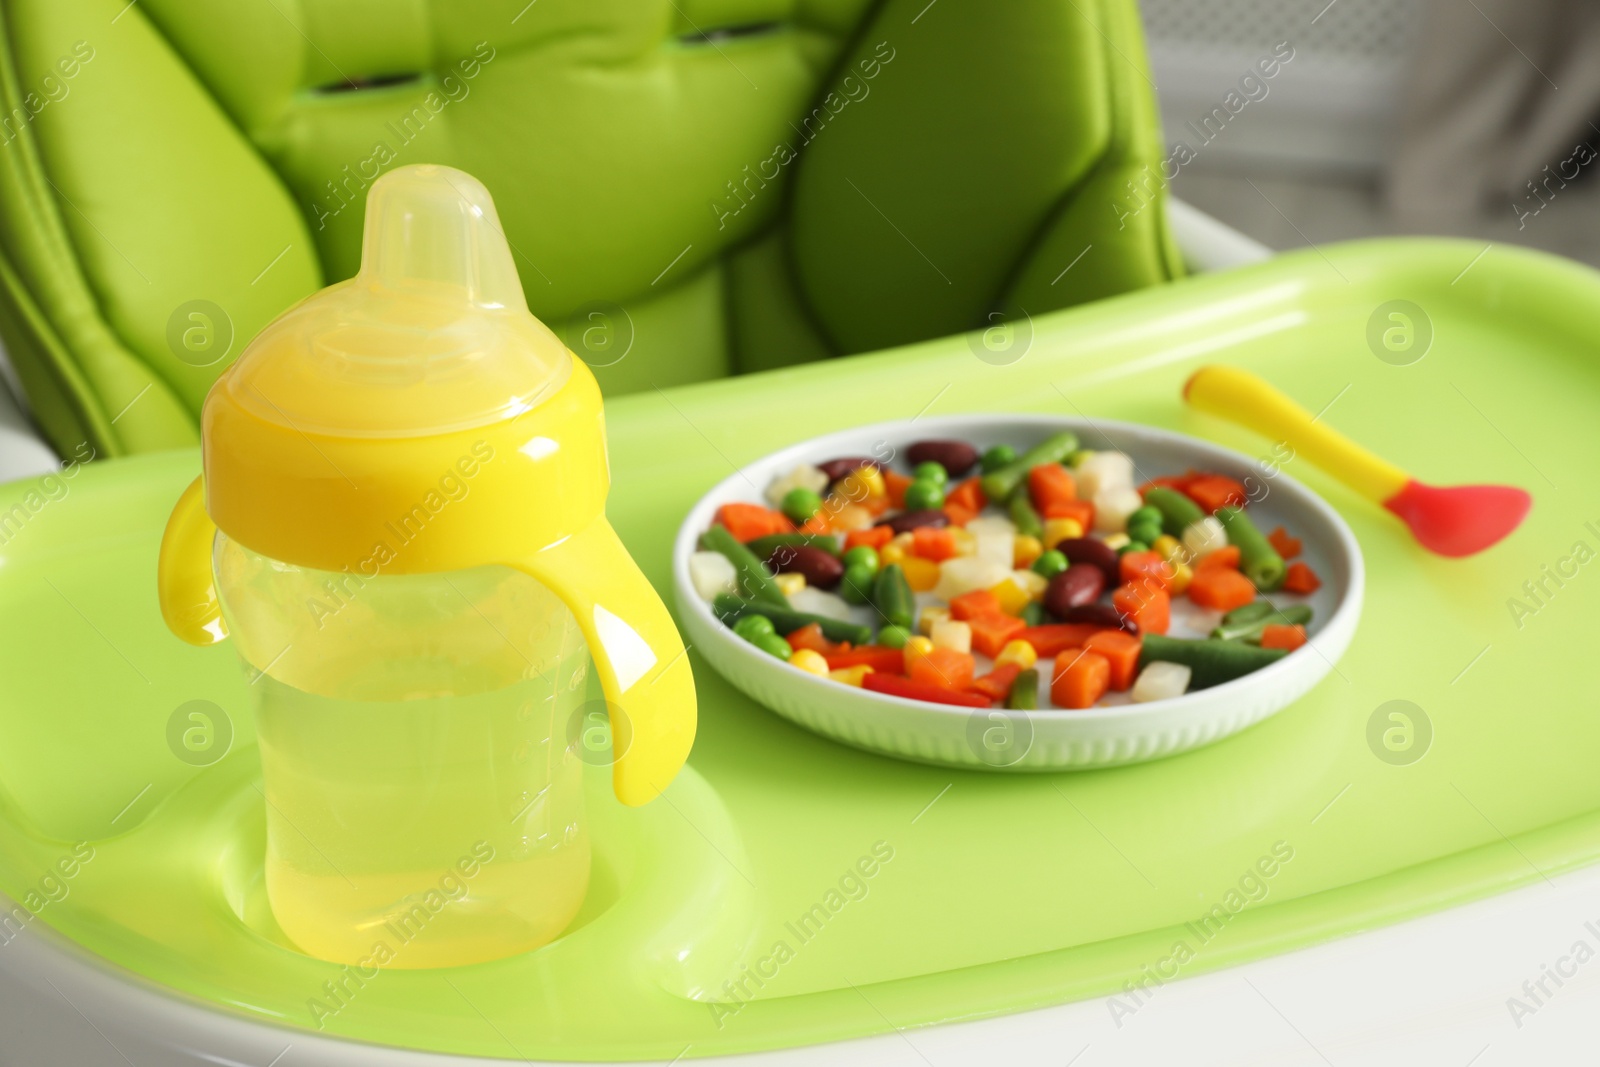 Photo of Baby high chair with healthy food and water, closeup view